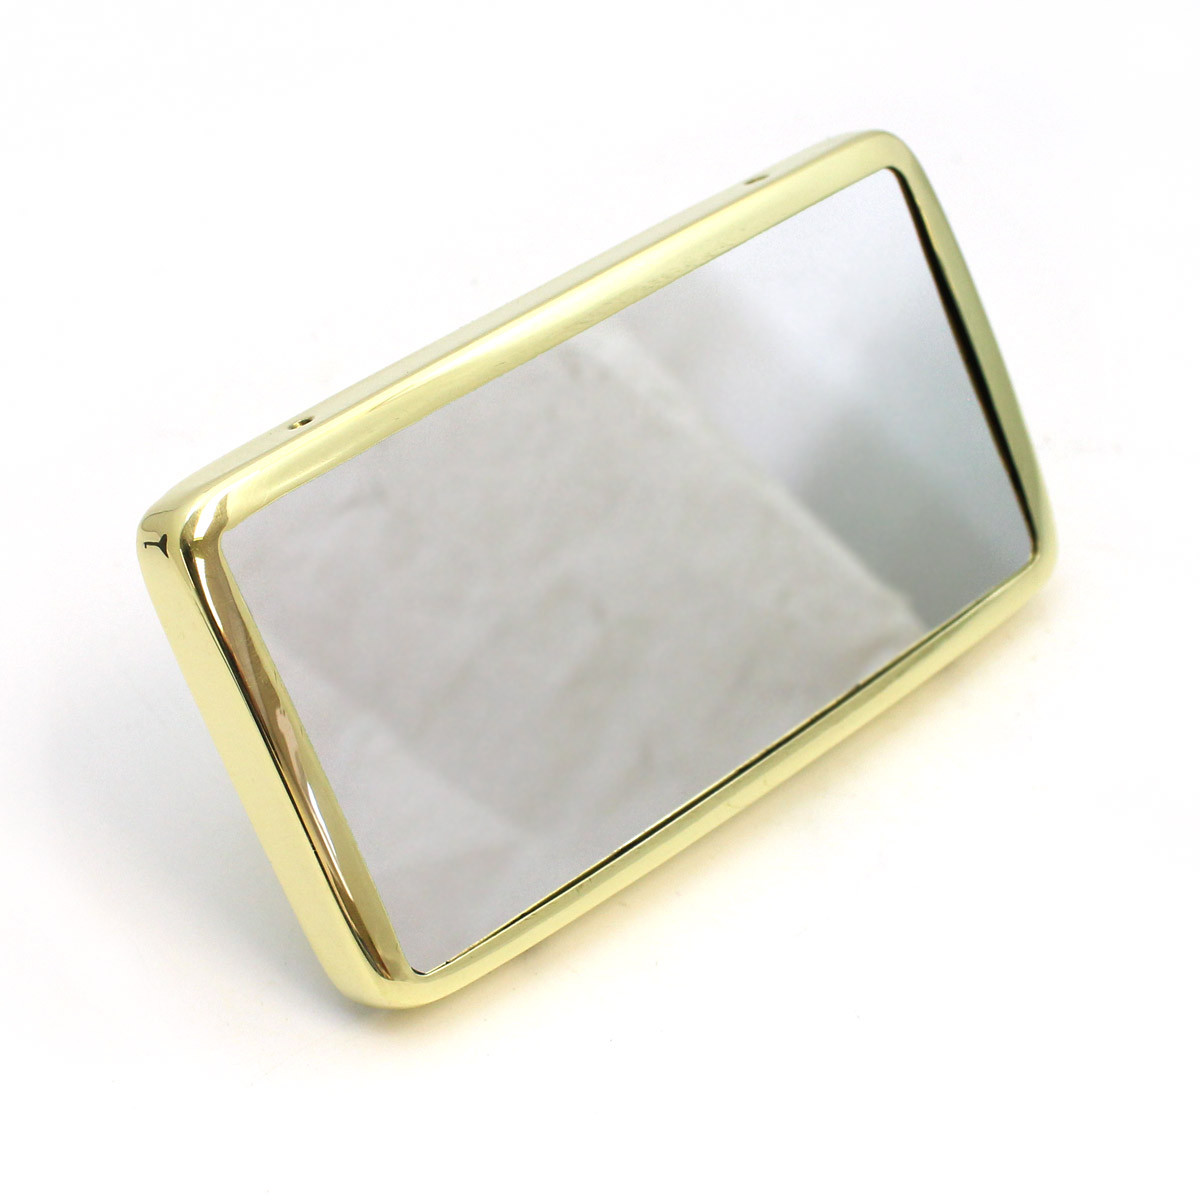 Rectangular rear view mirror - 118mm x 67mm, TOBY branded - Nickel Plated with CONVEX glass, TOBY stamped